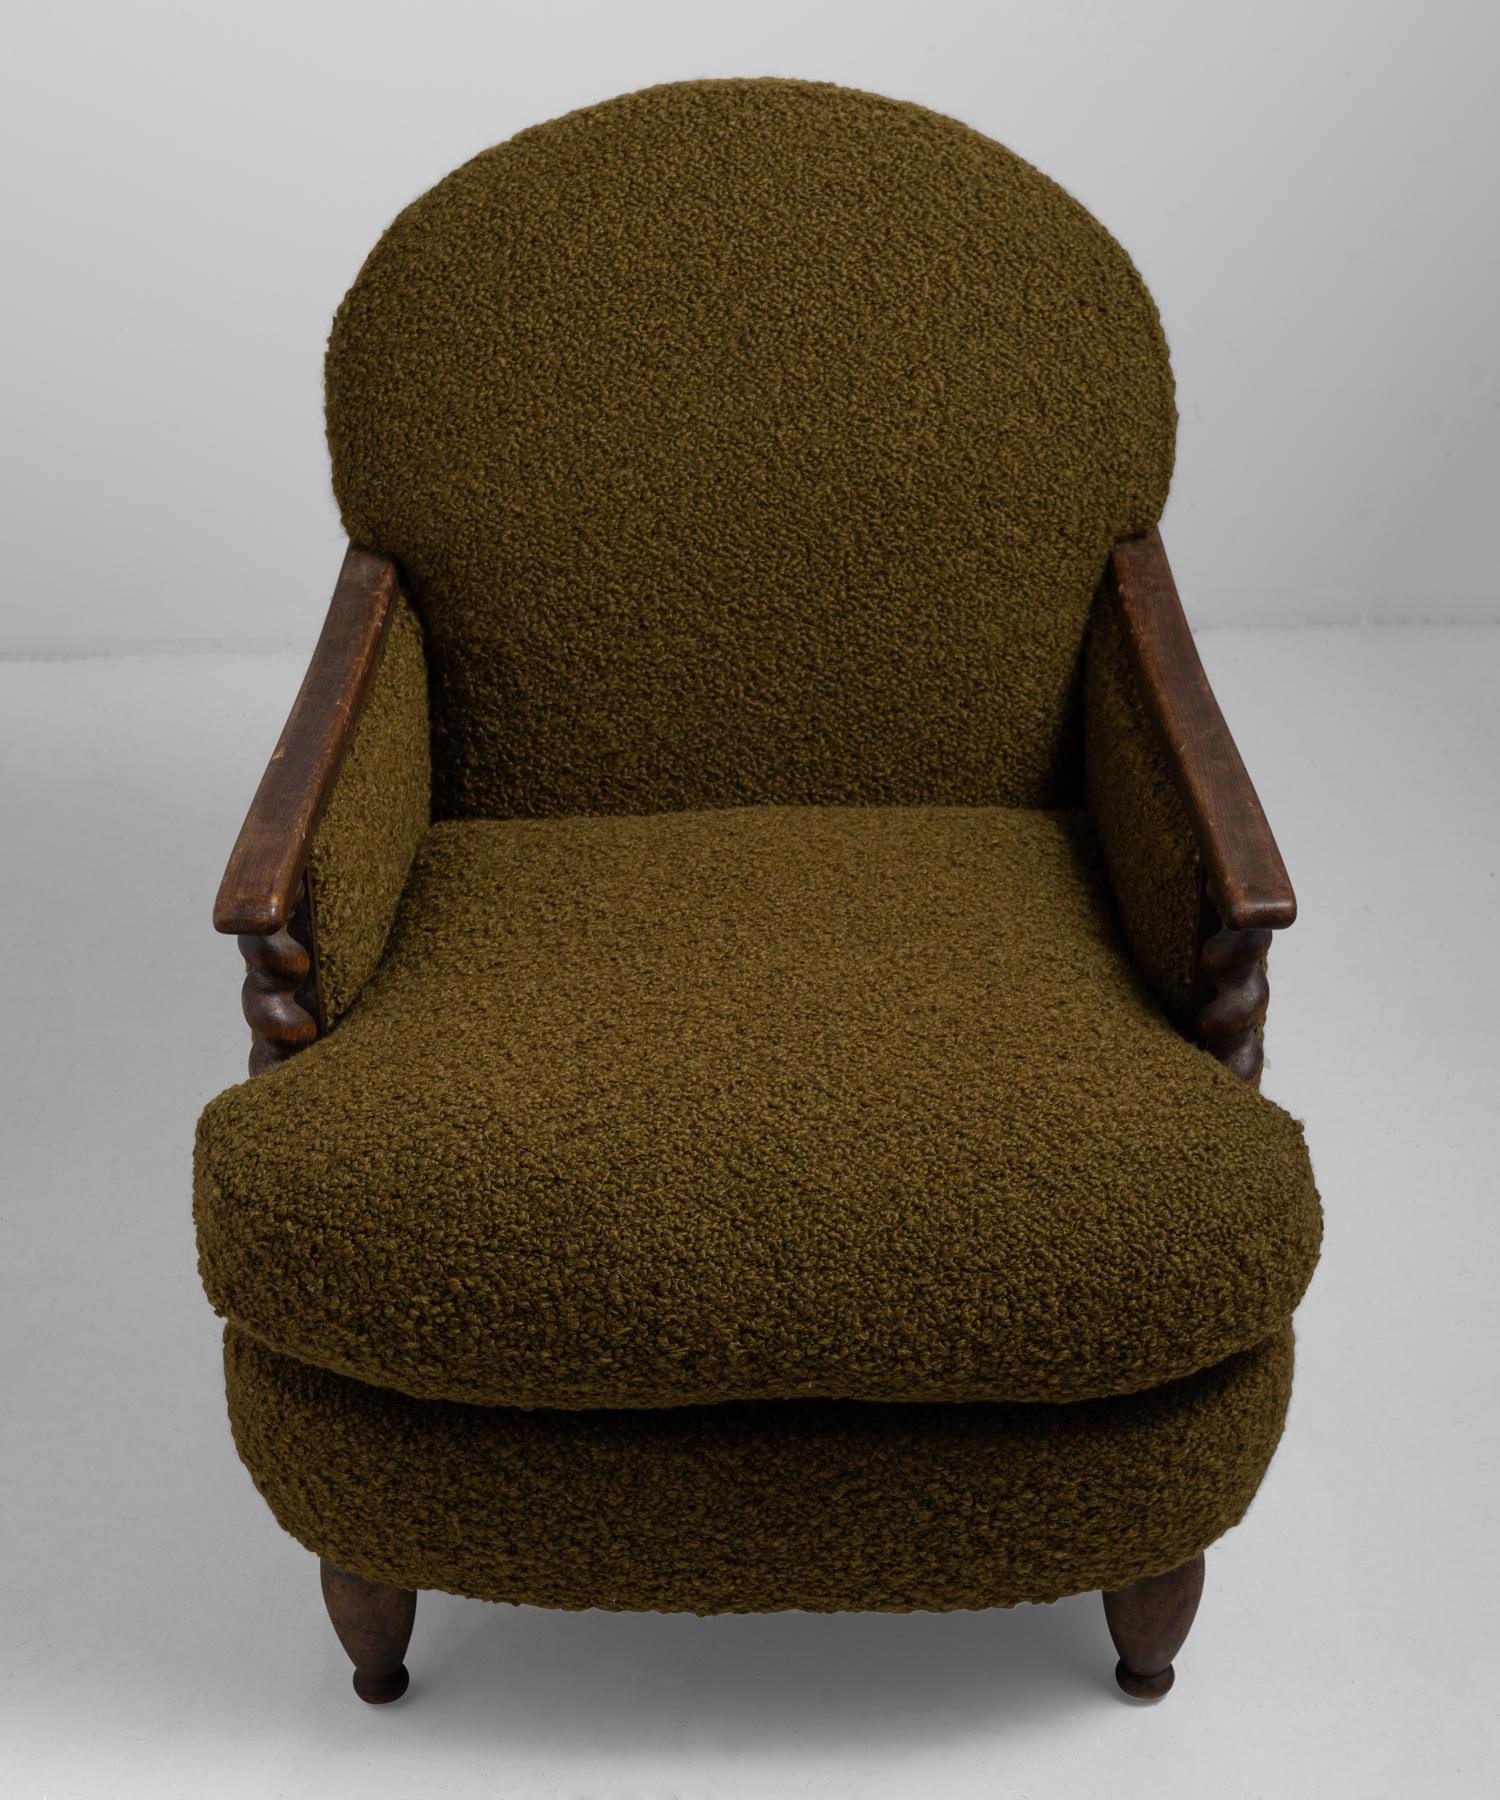 French Armchairs in Pierre Frey Wool / Mohair / Alpaca Boucle 